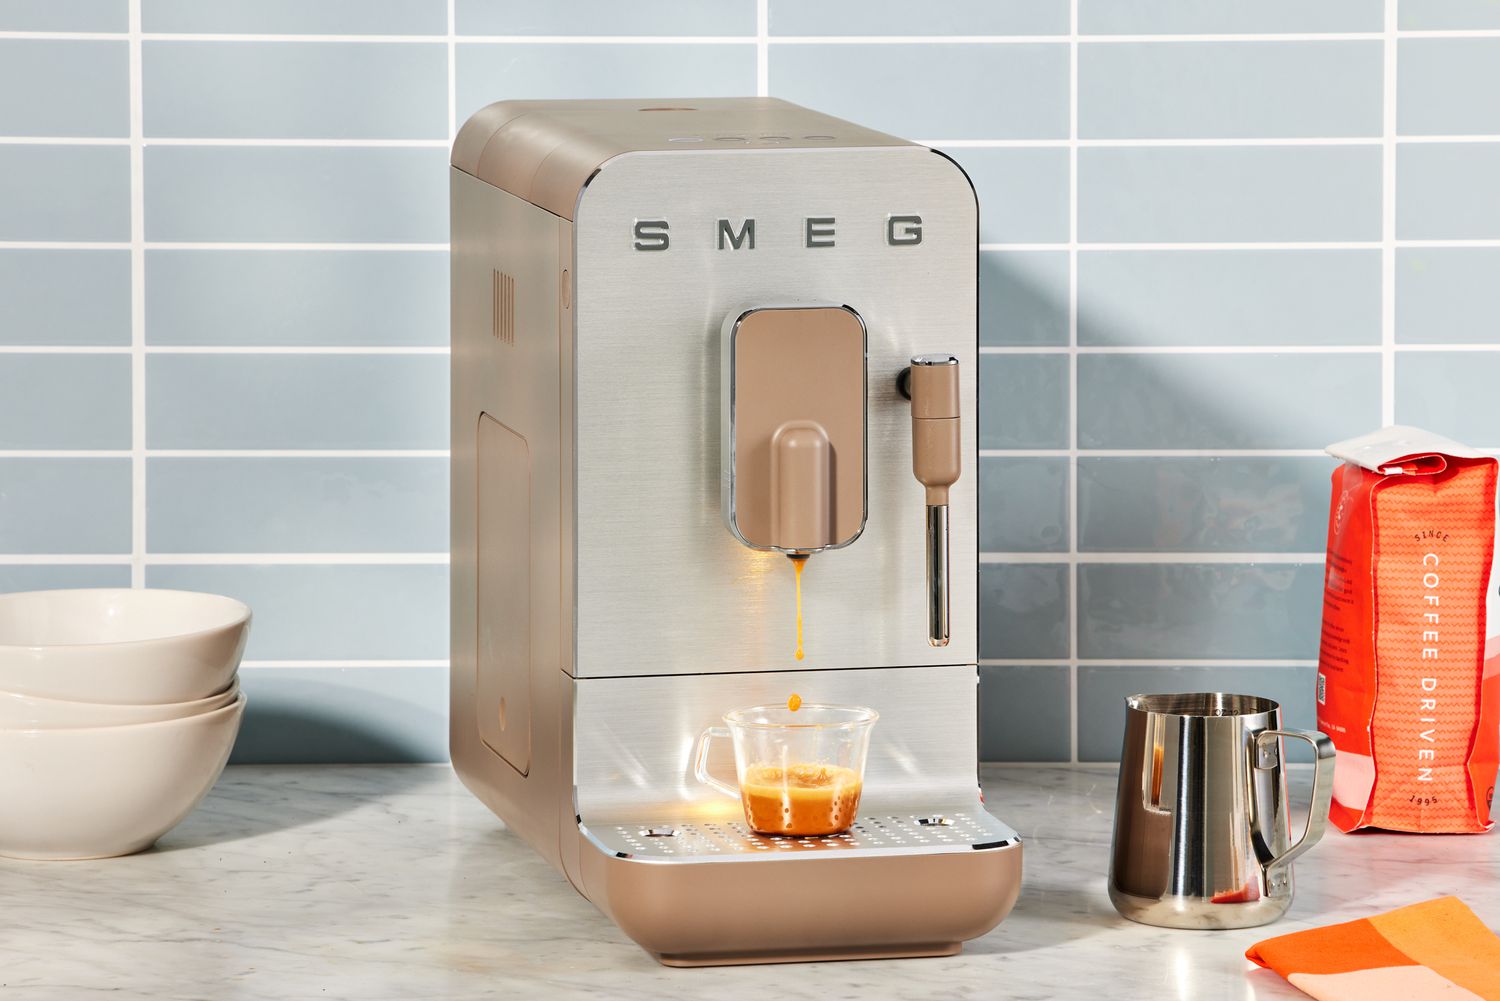 The SMEG Medium Fully-Automatic Coffee Machine on a kitchen counter next to coffee beans.